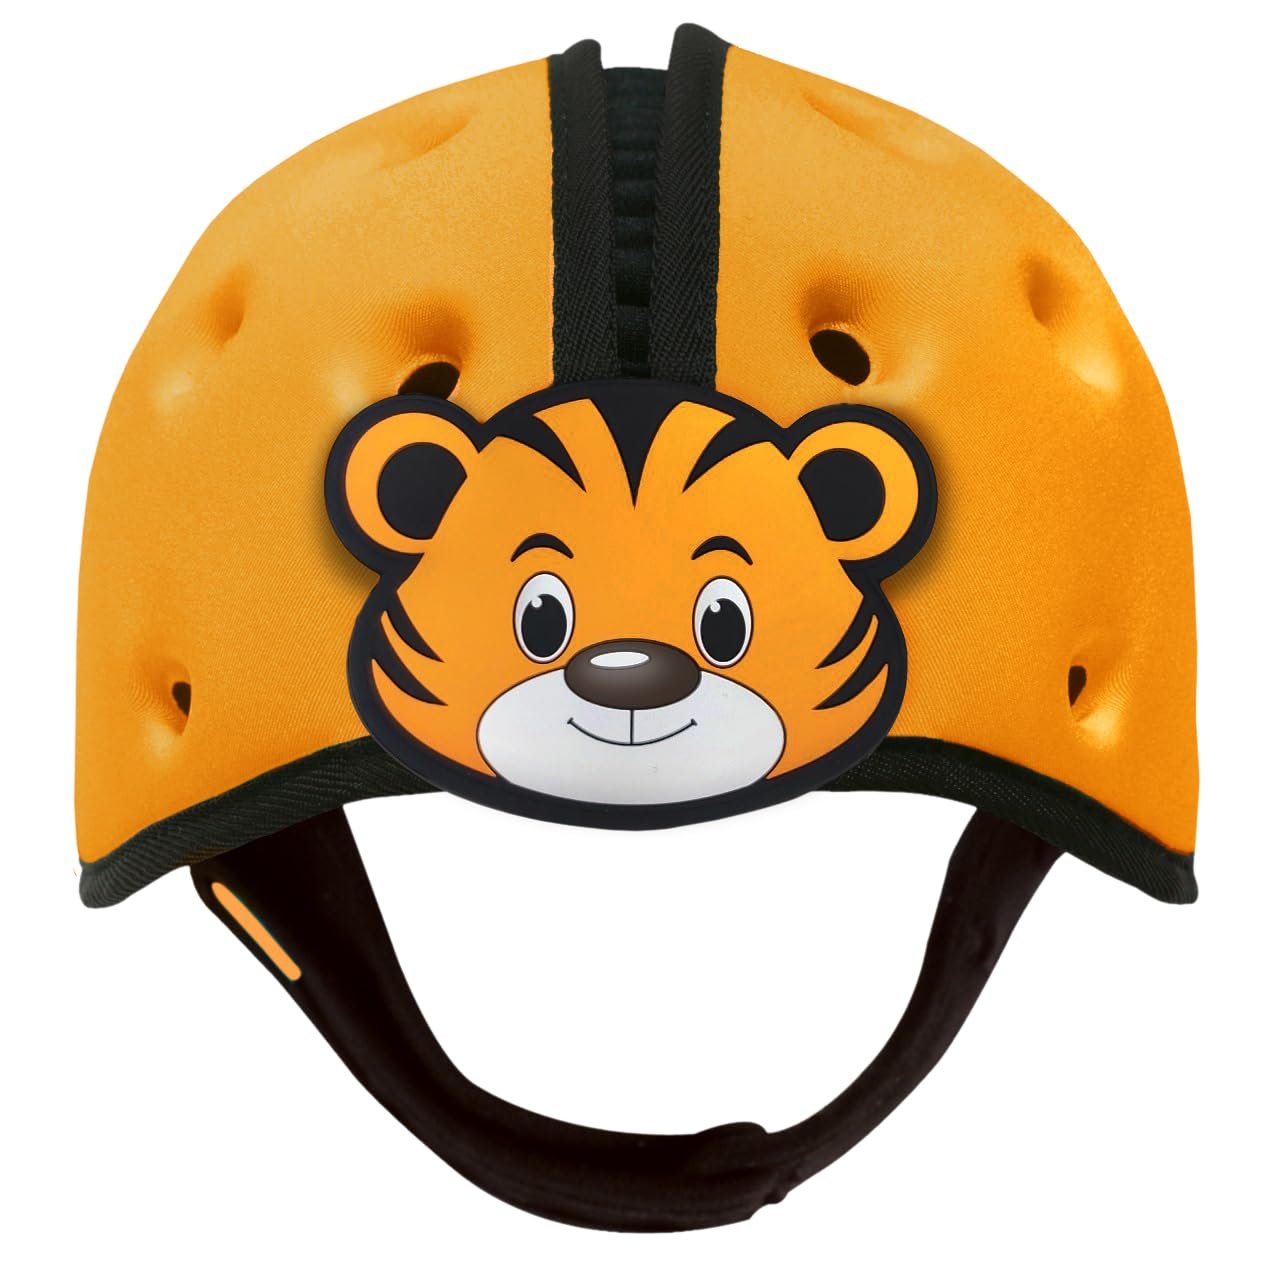 SafeheadBABY Award-Winning Infant Safety Helmet Baby Helmet for Crawling Walking Ultra-Lightweight Baby Head Protector Expandable and Breathable Toddler Head Protection Helmets - Tiger Orange